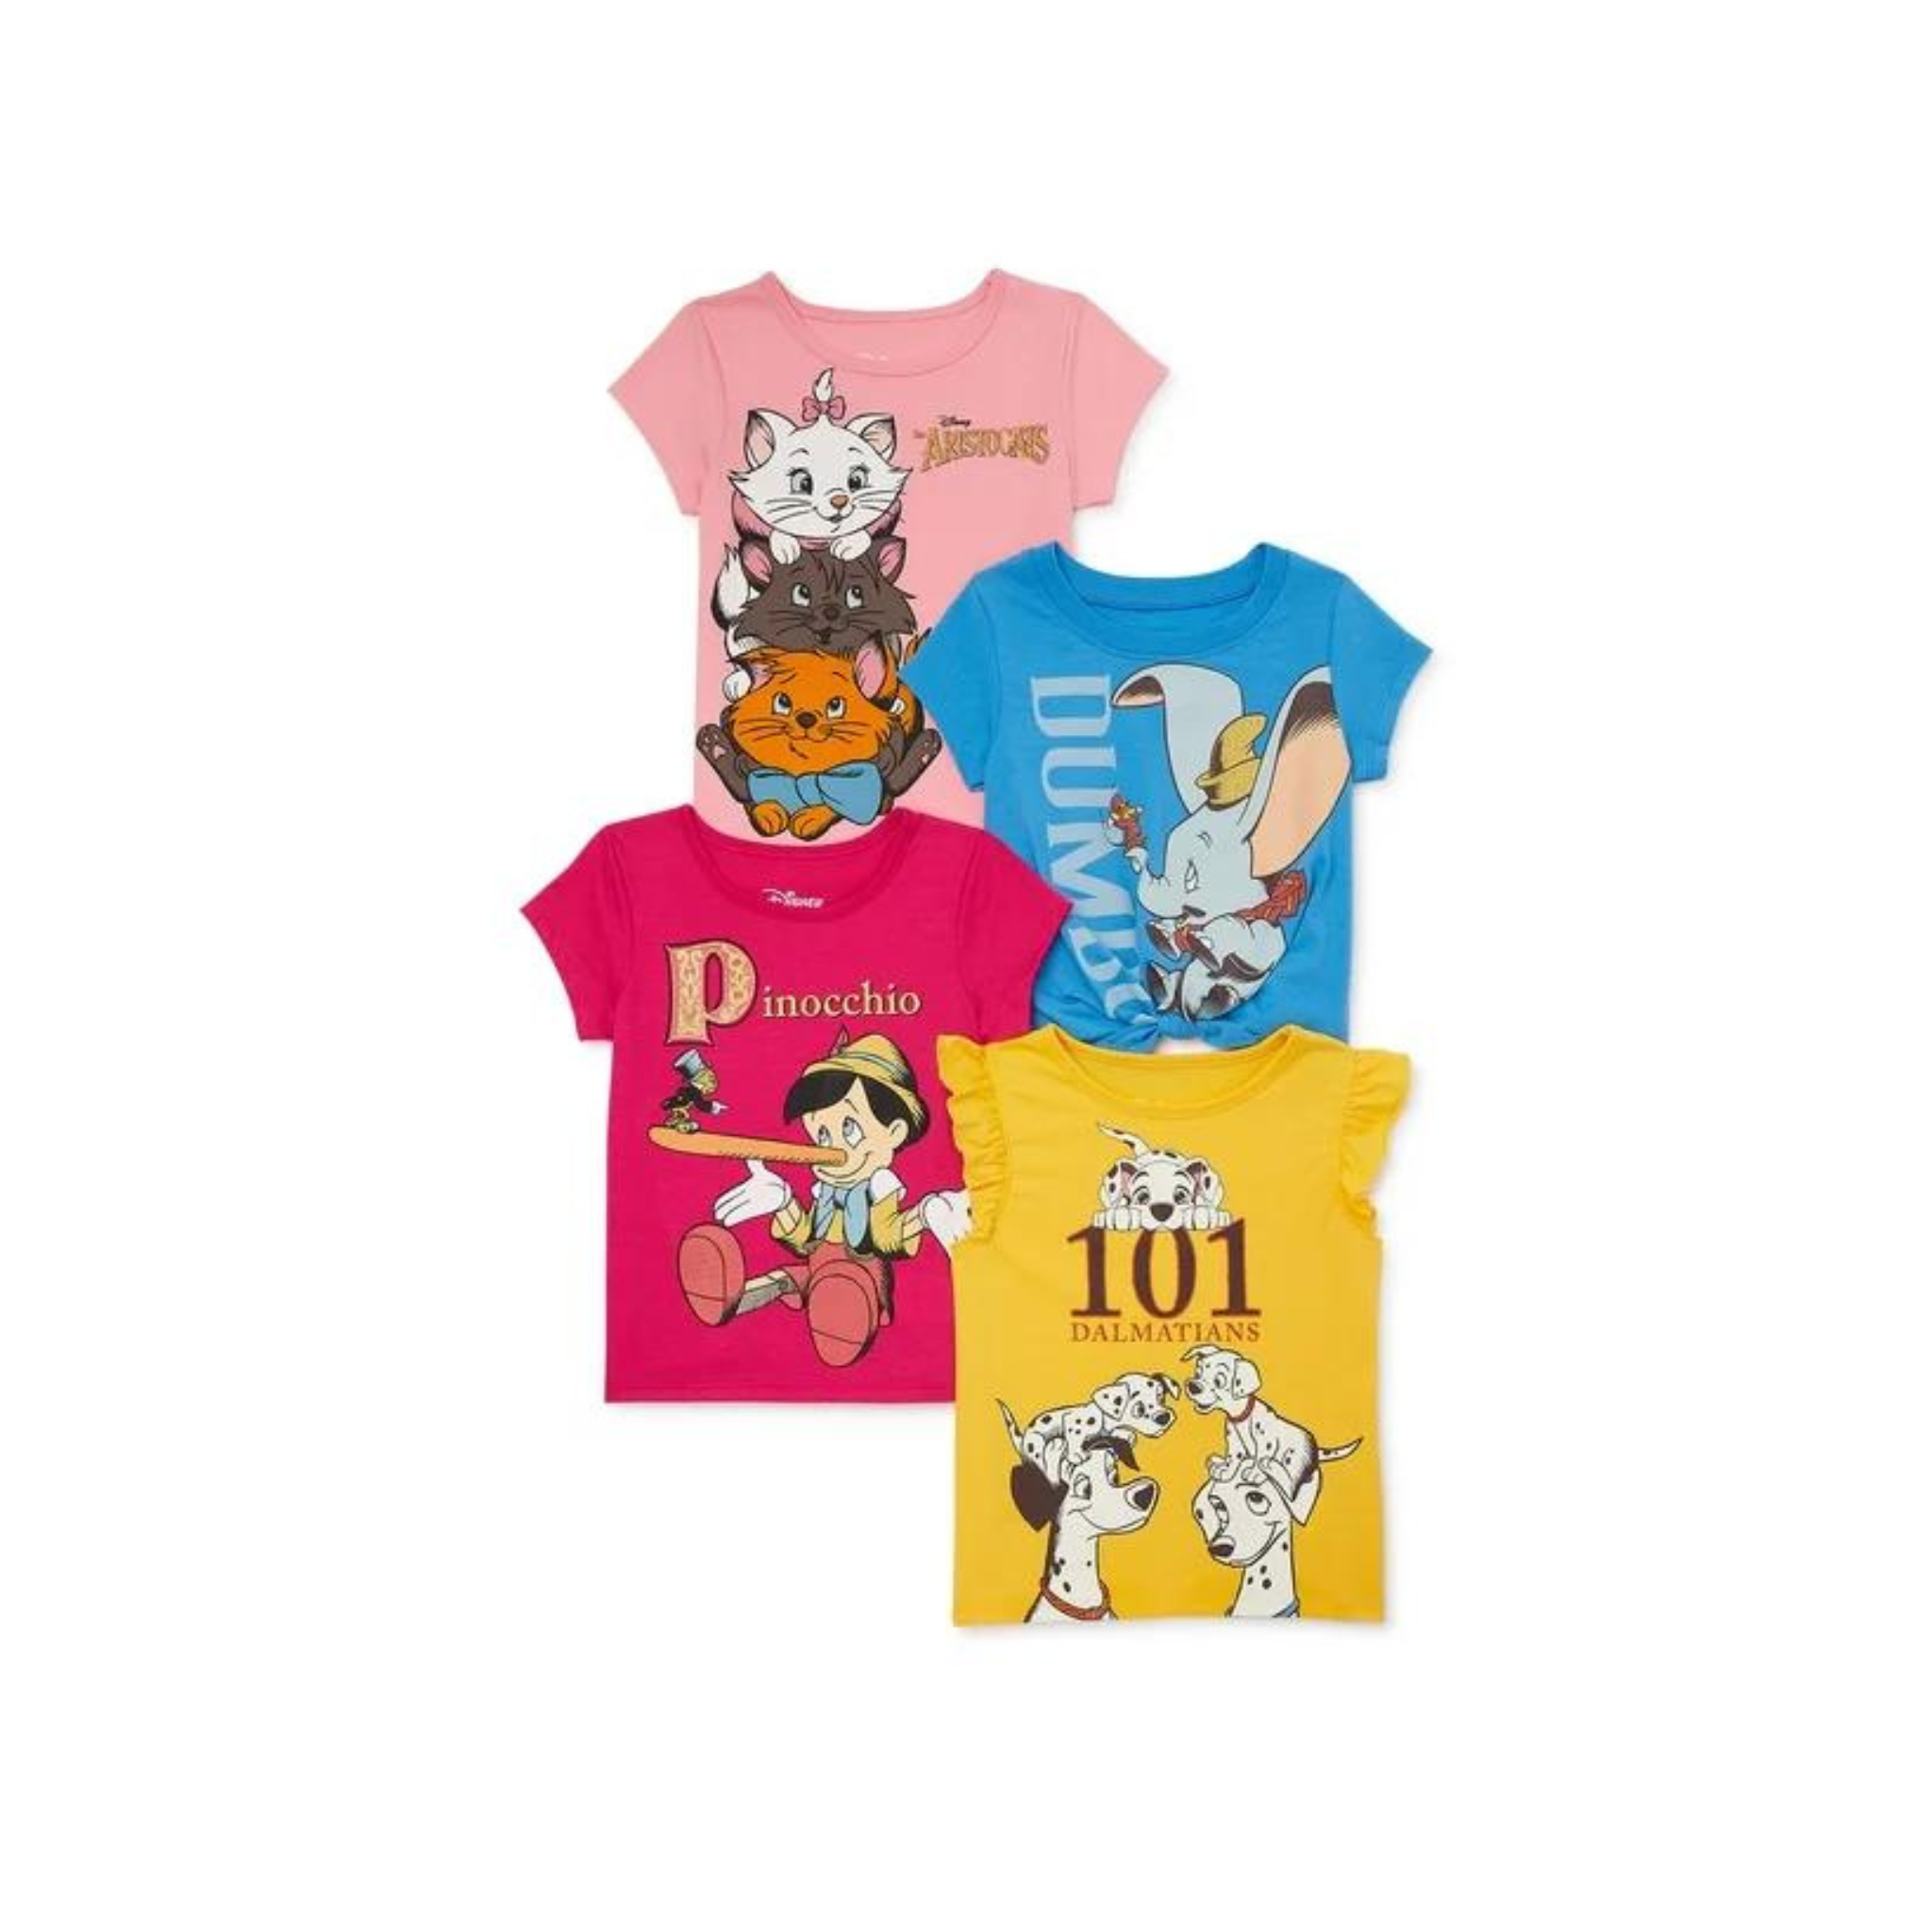 4-Pack Toddler Girls' Graphic T-Shirts: Disney Classics, Harry Potter or Peanuts